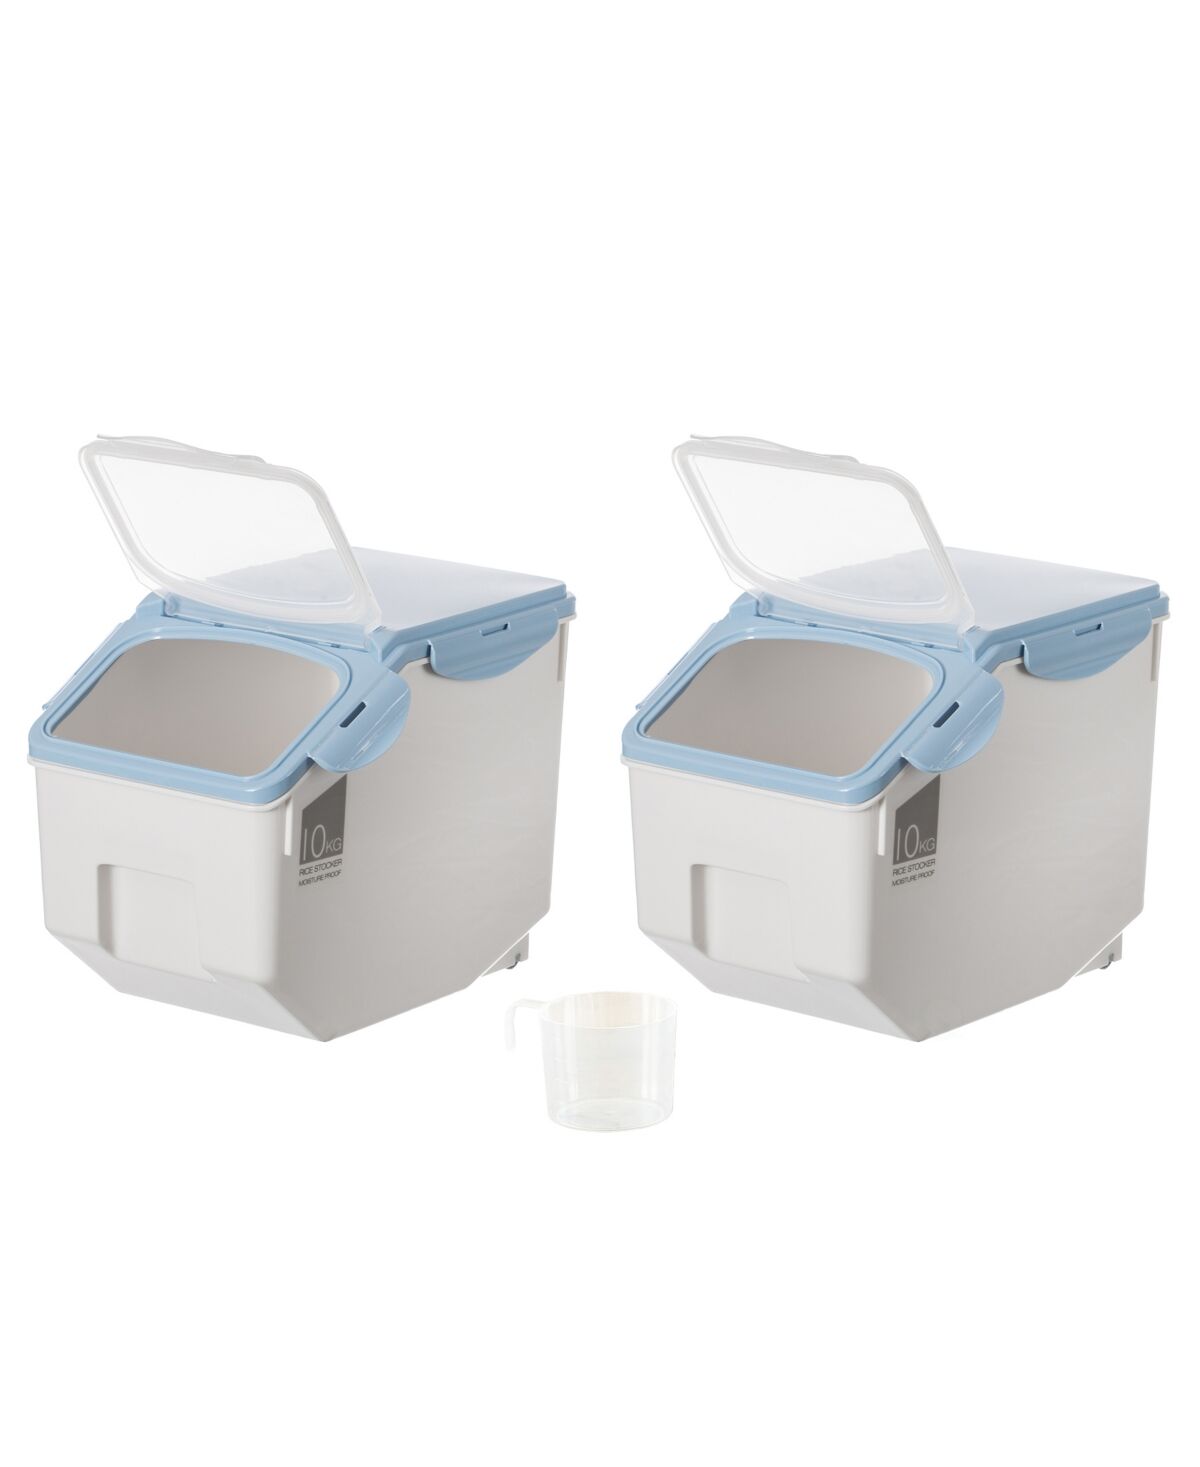 Basicwise Medium Plastic Storage Food Holder Containers with a Measuring Cup and Wheels, Set of 3 - White